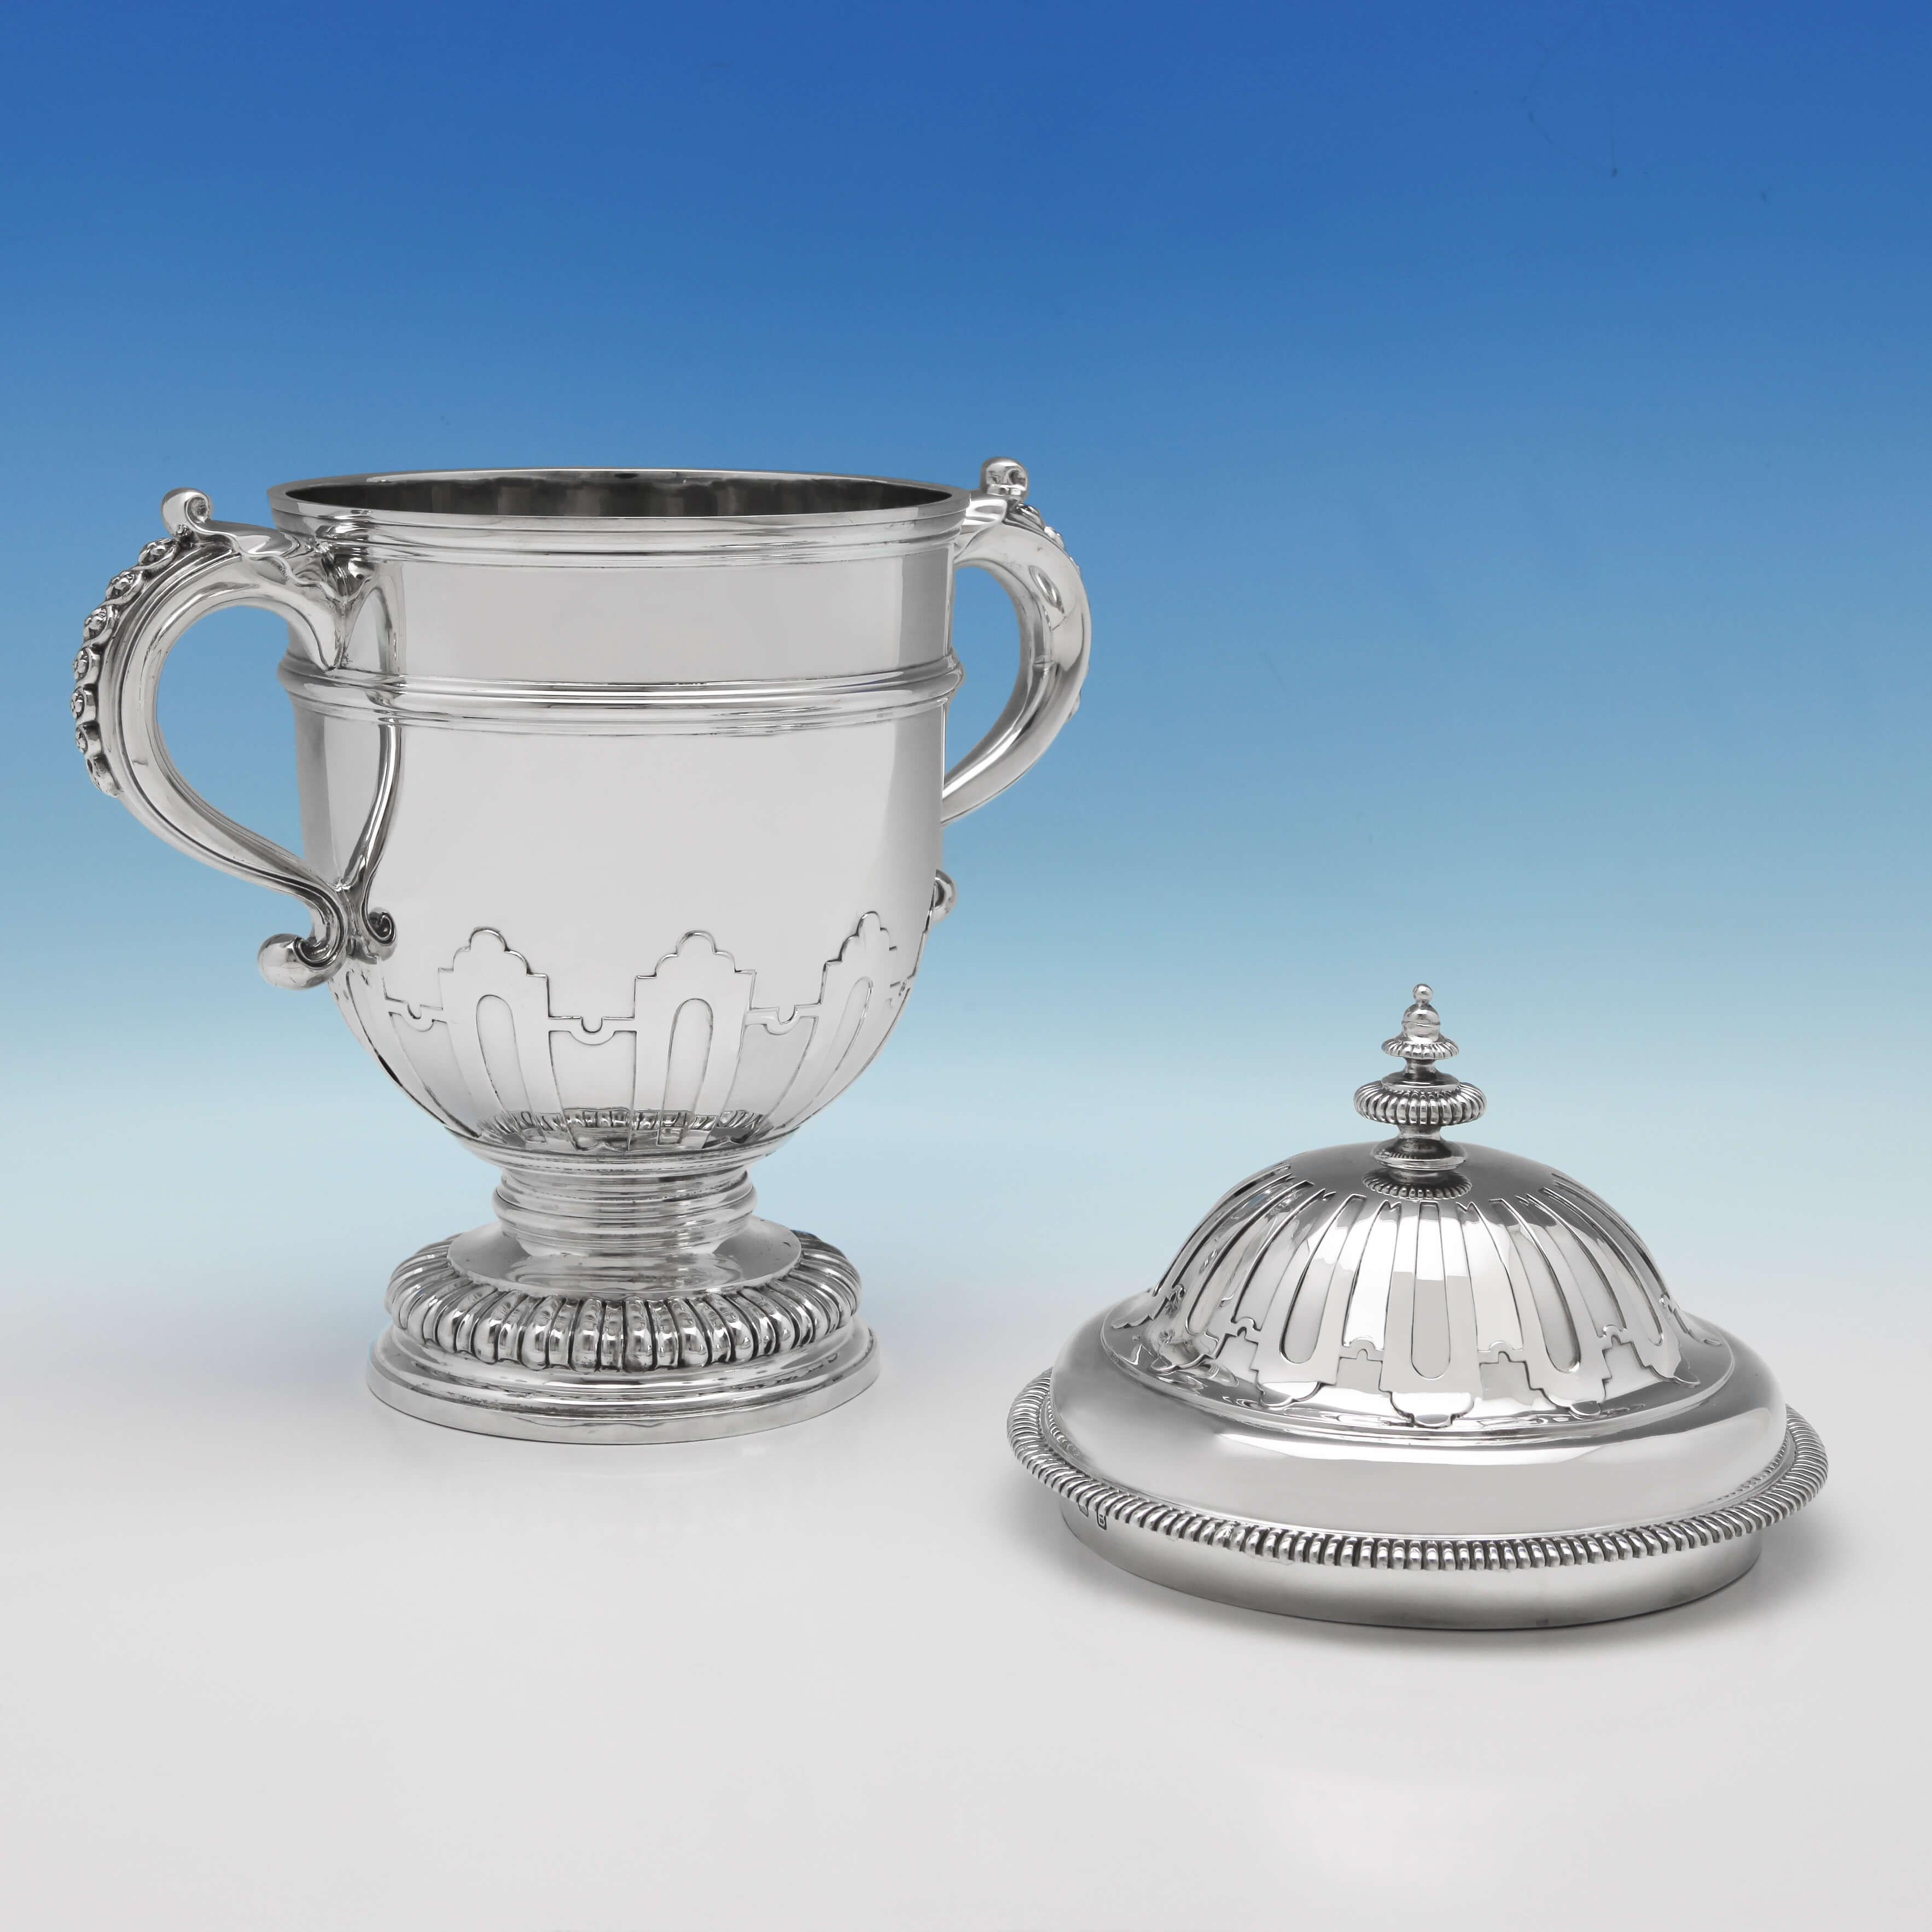 Hallmarked in London in 1937 by Richard Comyns, this handsome, sterling silver cup and cover features cut card decoration, gadroon borders, a fluted foot and acanthus leaf and floral decoration to the handles. The cup measures 13.5